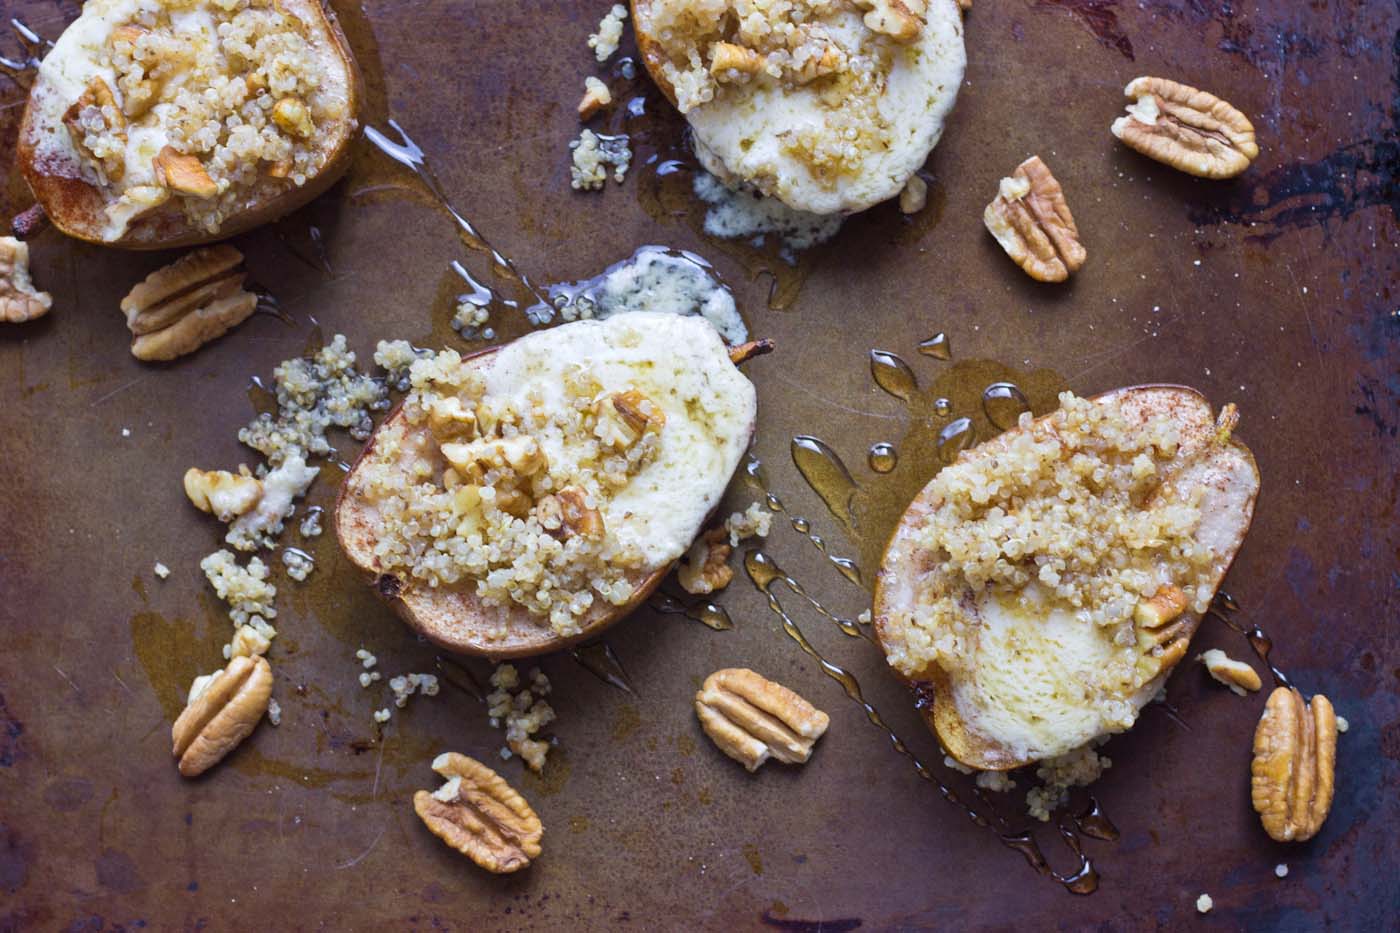 Roasted Quinoa Stuffed Pears are exactly what I want to eat on a cool morning this fall. These pears are stuffed with mascarpone cheese, quinoa, and pecans. So yum!